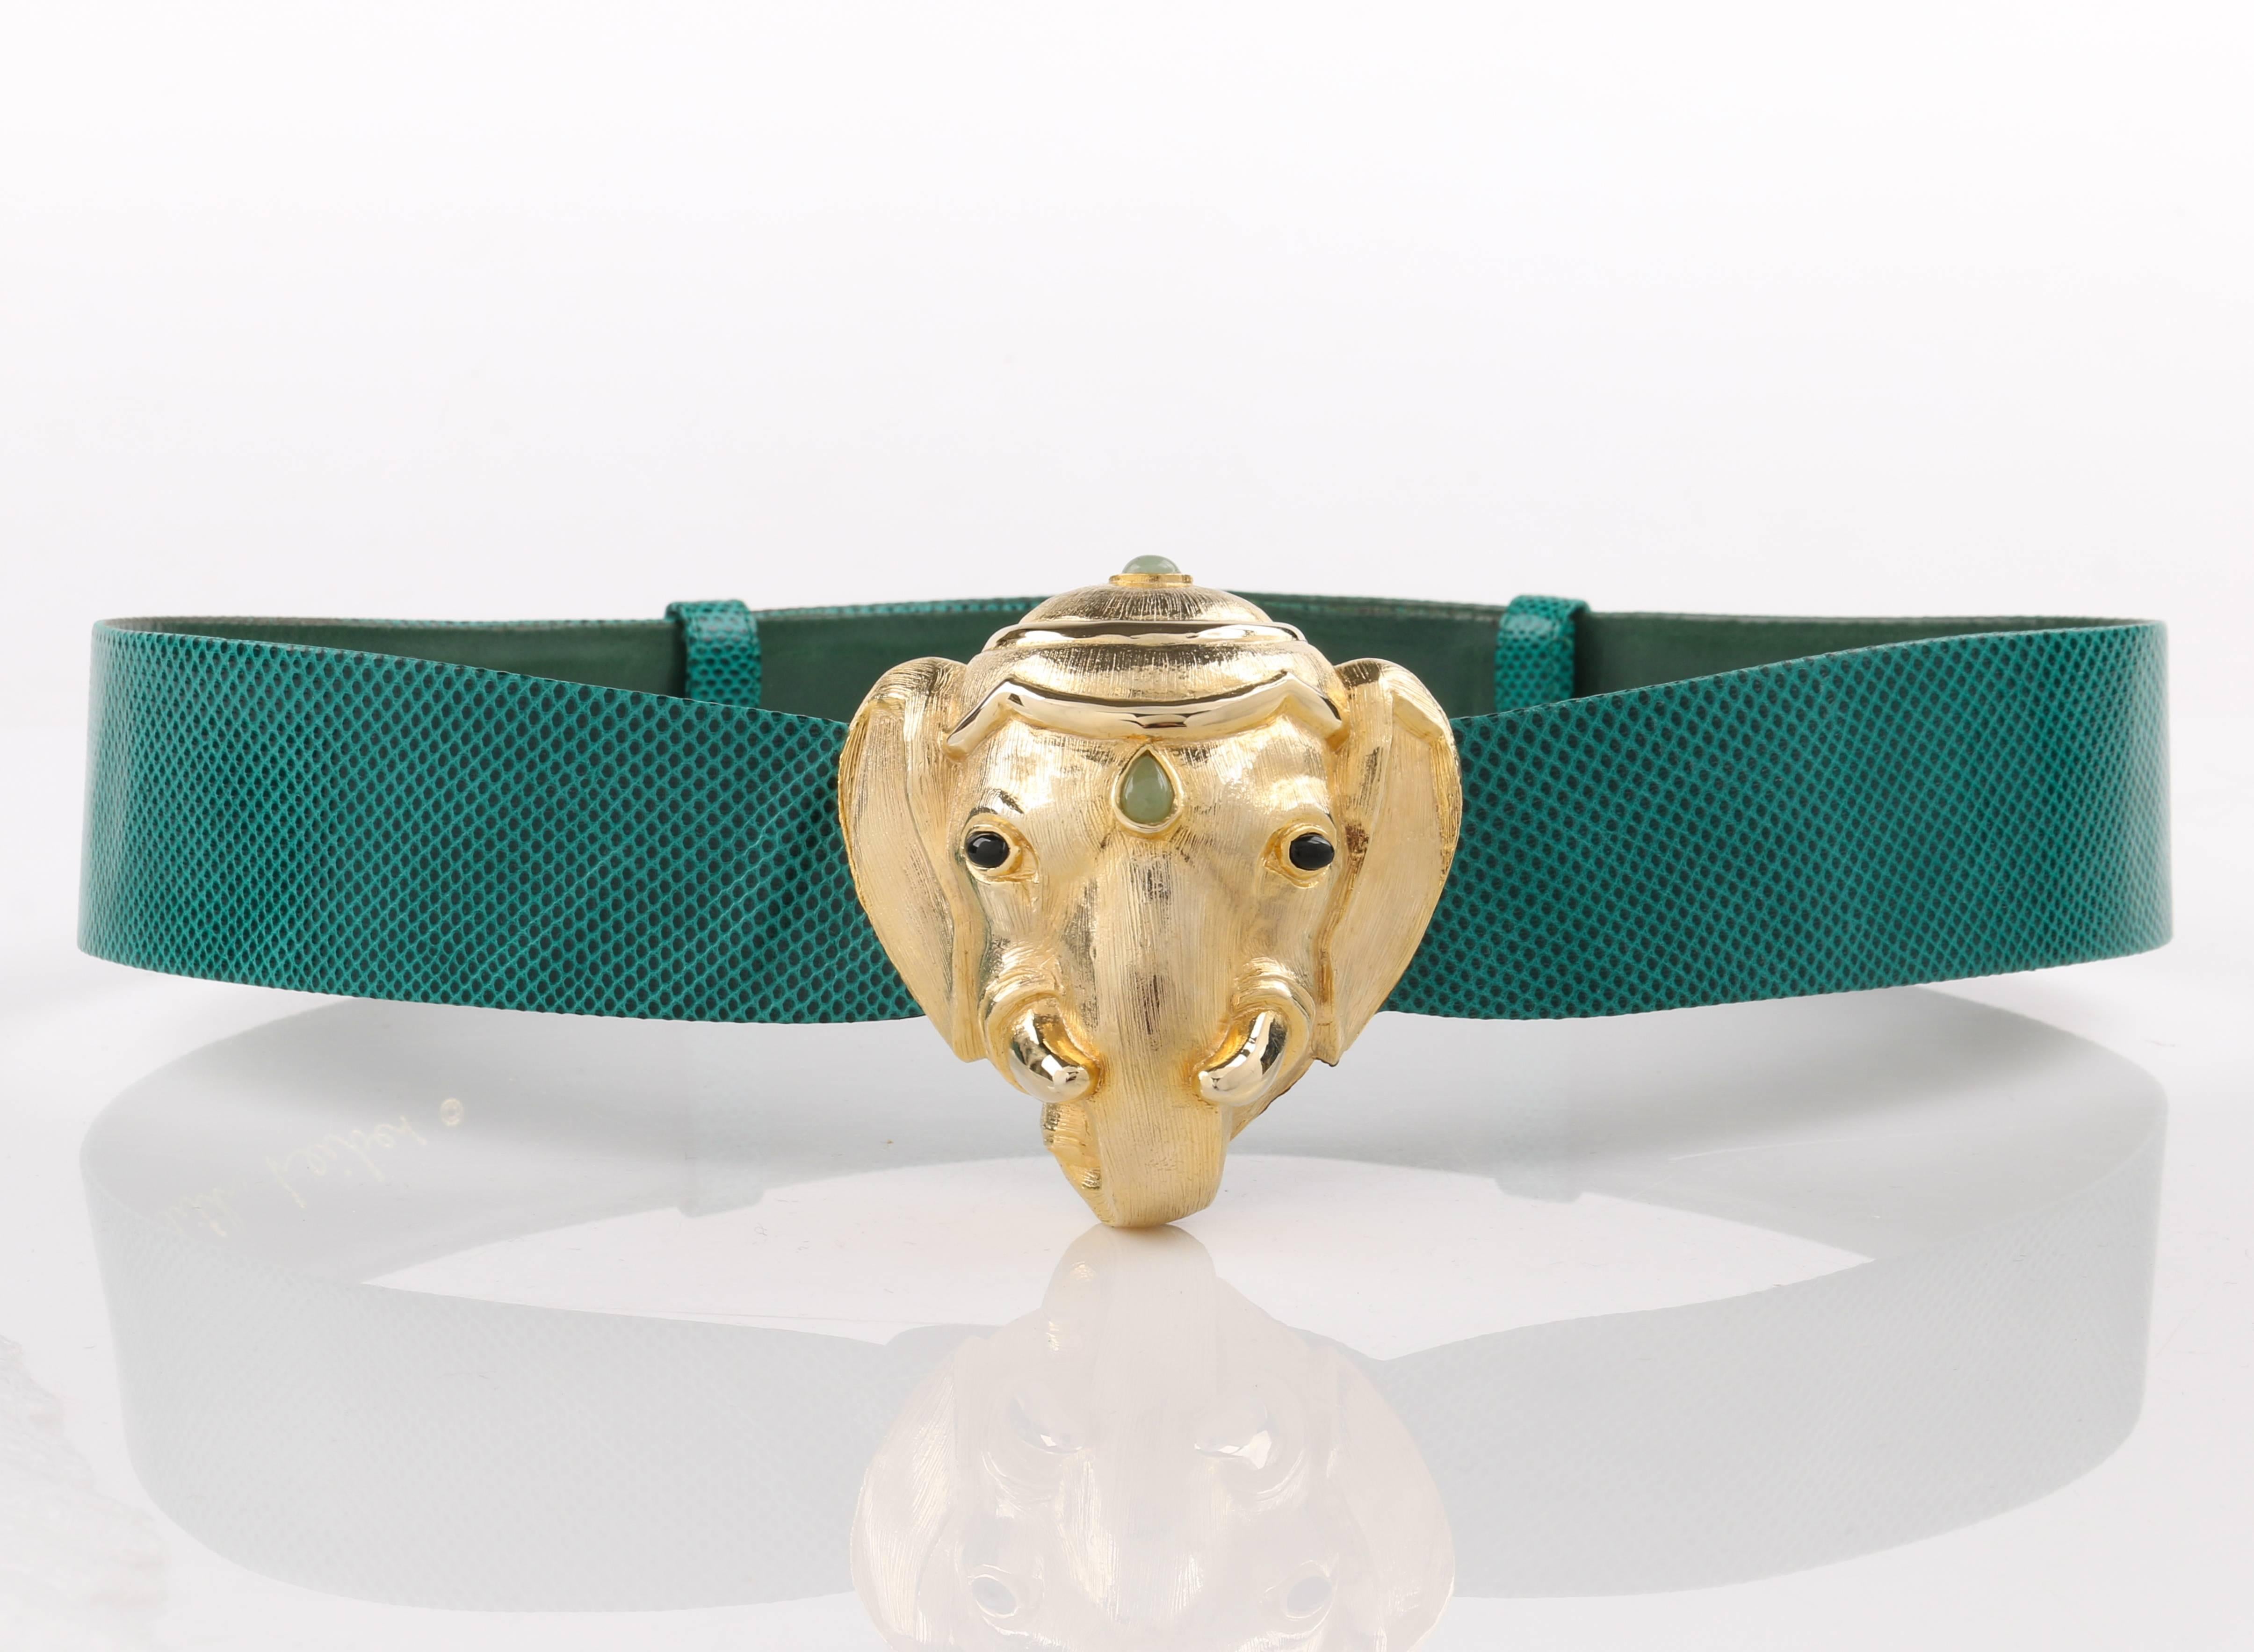 Vintage Judith Leiber c.1980's emerald green lizard skin leather gold Ganesh elephant head buckle belt. Emerald green lizard skin adjustable sliding leather body. Gold-toned metal Ganesh elephant head buckle with cabochon stones in onyx and light